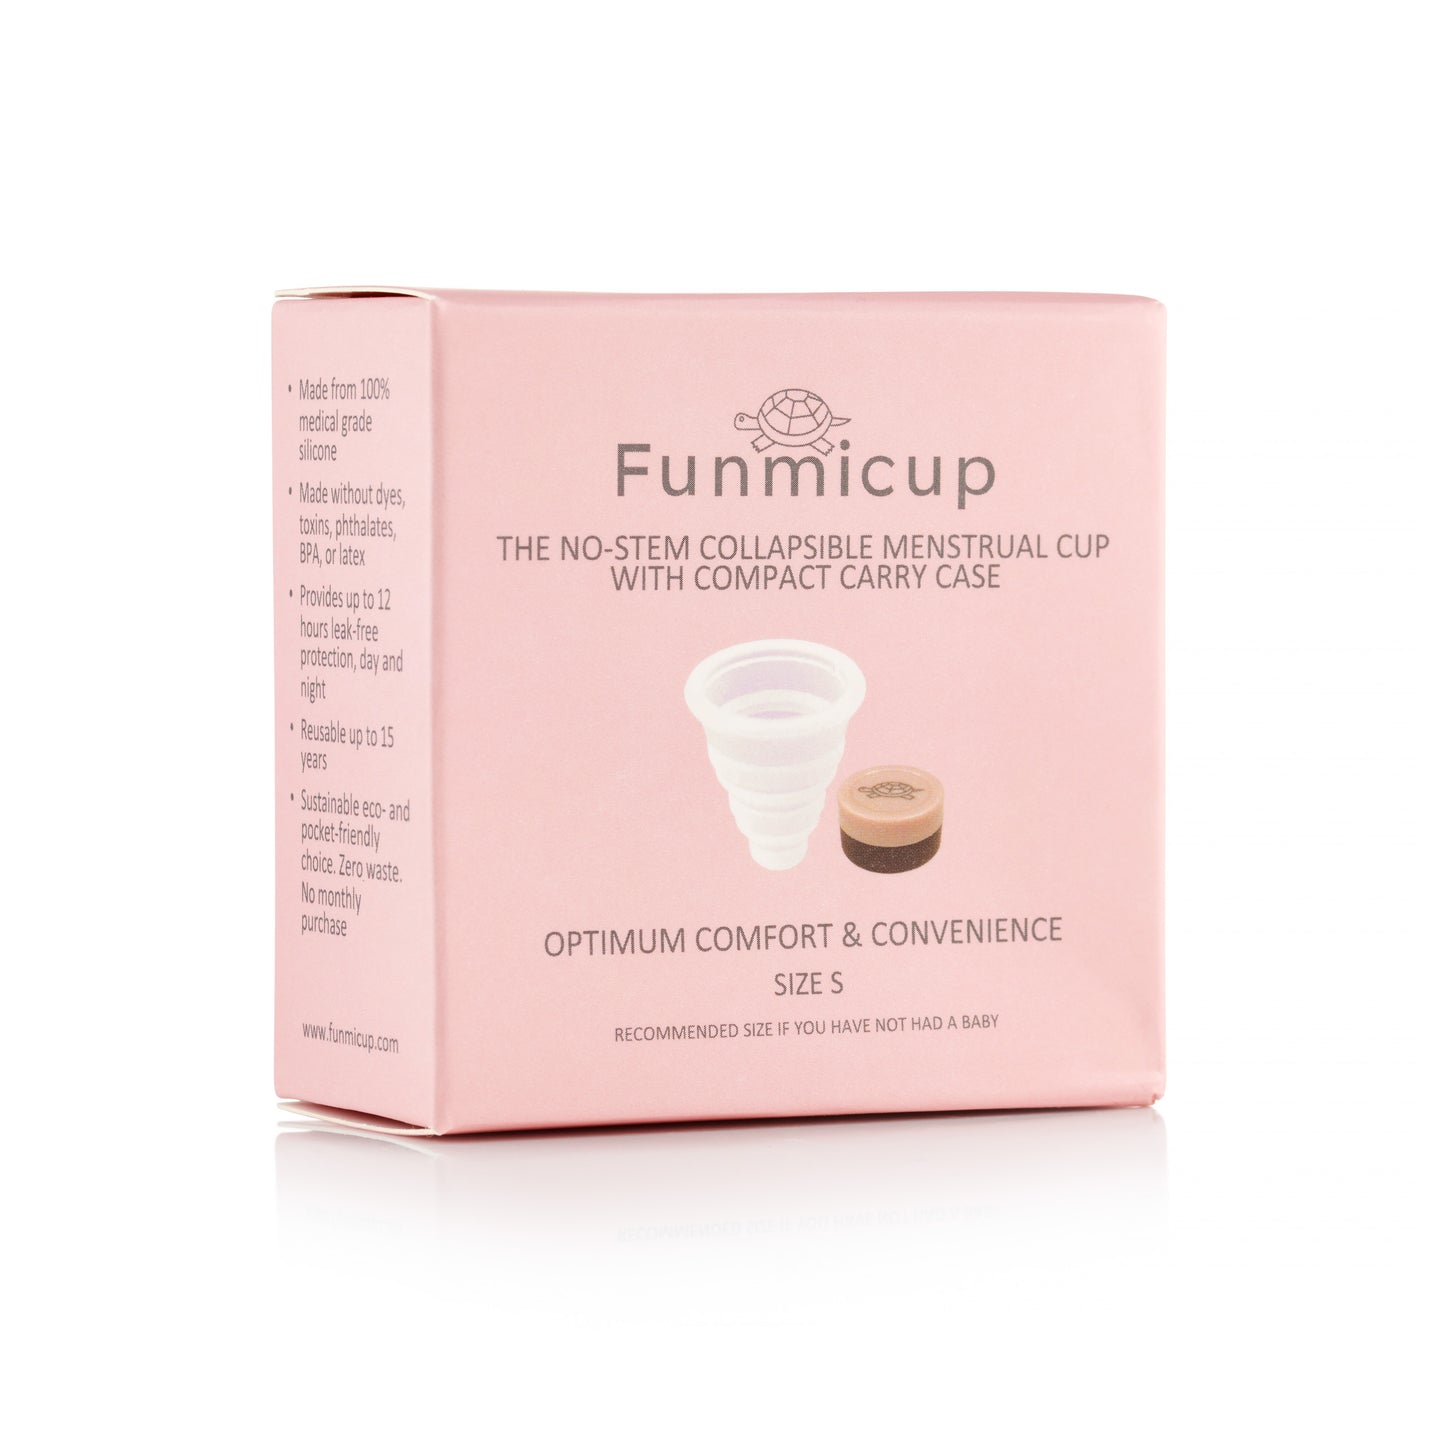 Funmicup No-stem Collapsible Menstrual Cup - Small packaging 